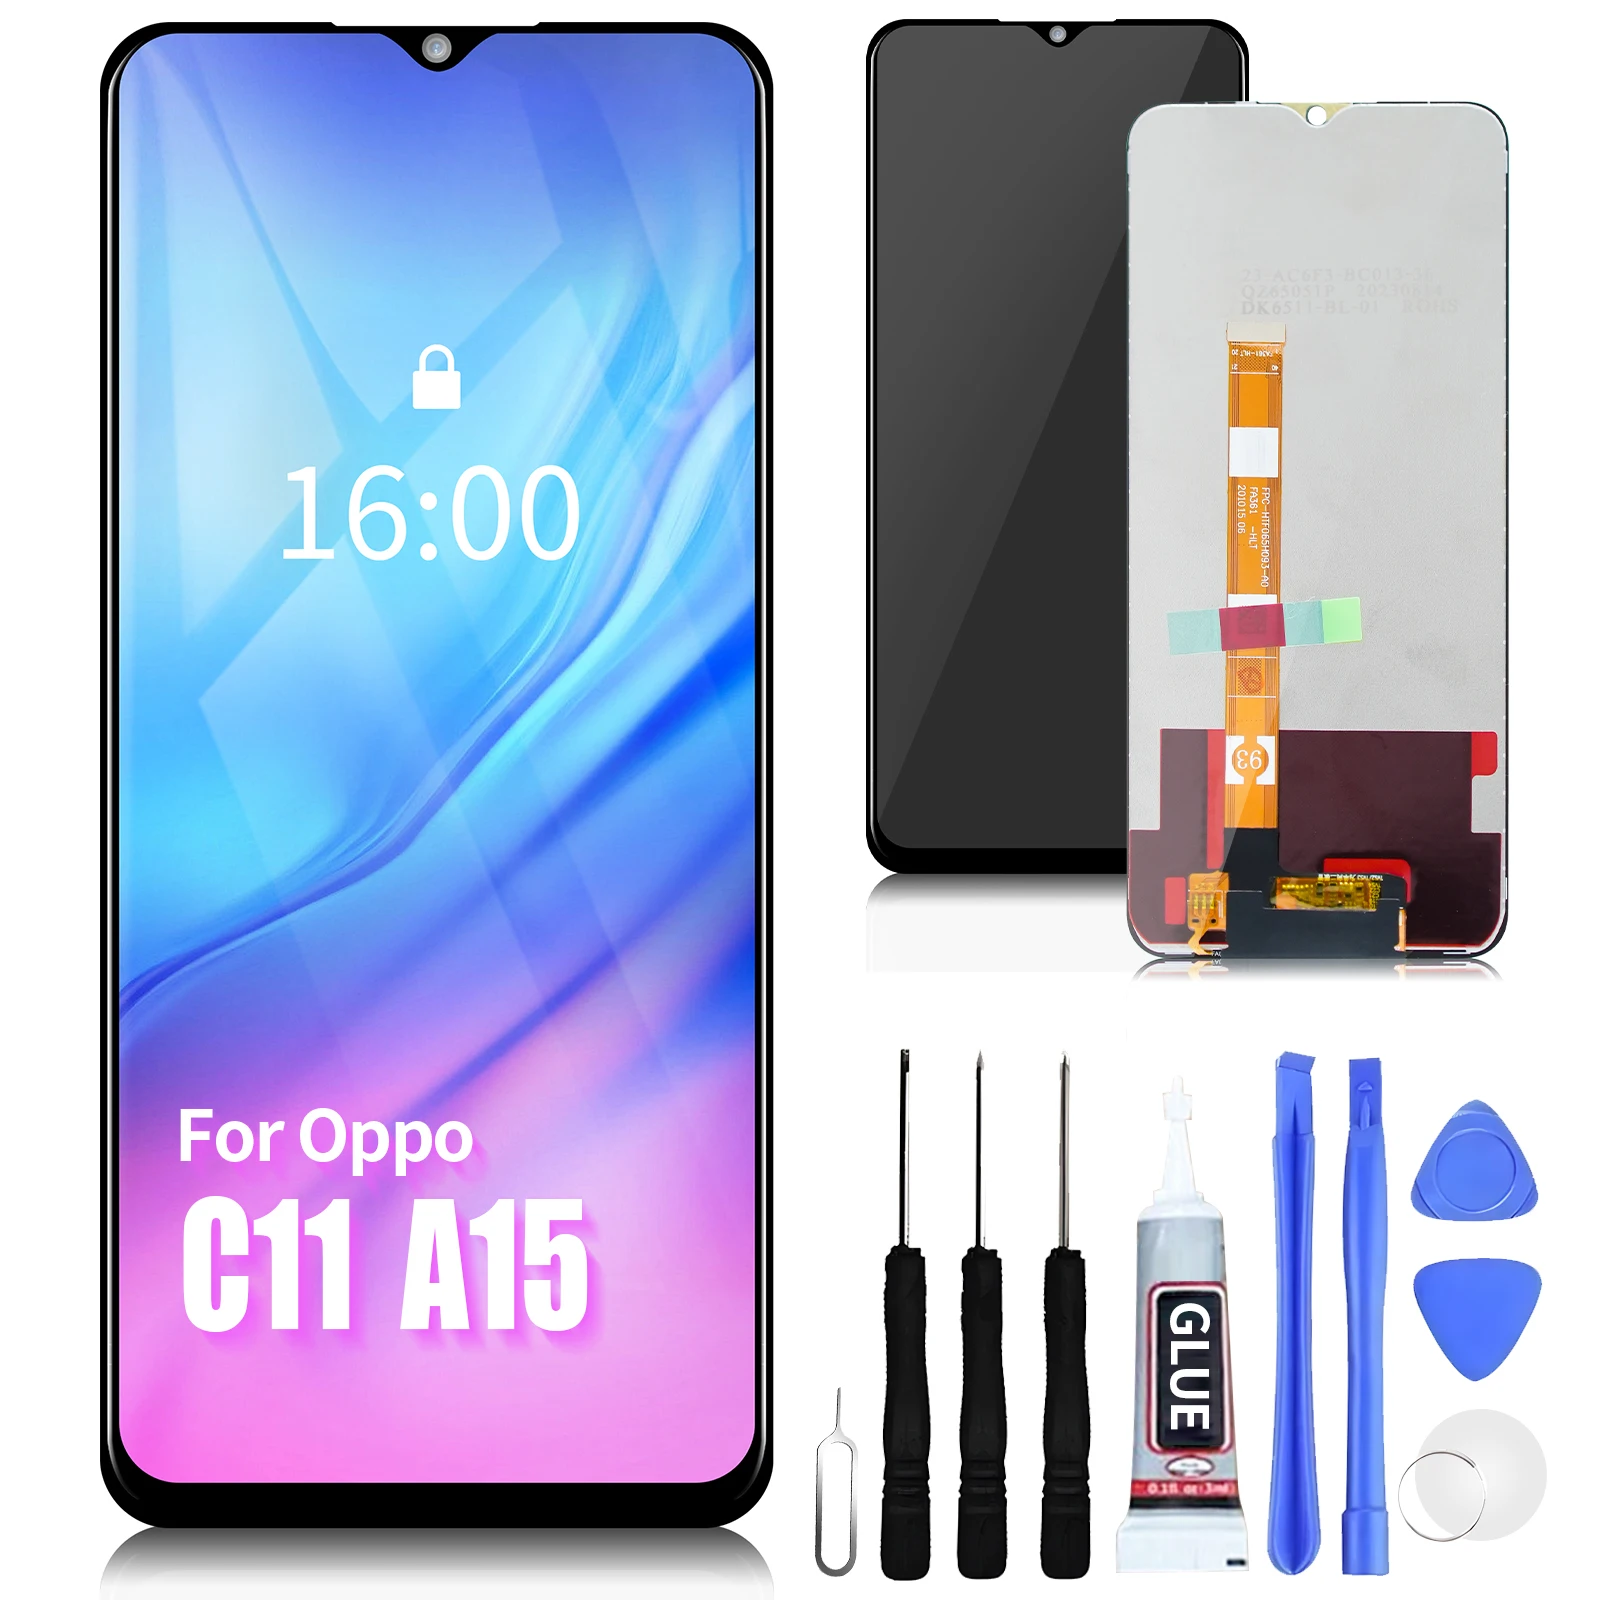 

For Oppo A15 LCD A15s Display Touch Screen Digitizer Assembly Replacement For realme C11/C12/C15/V3/Q2i /Narzo 20 LCD